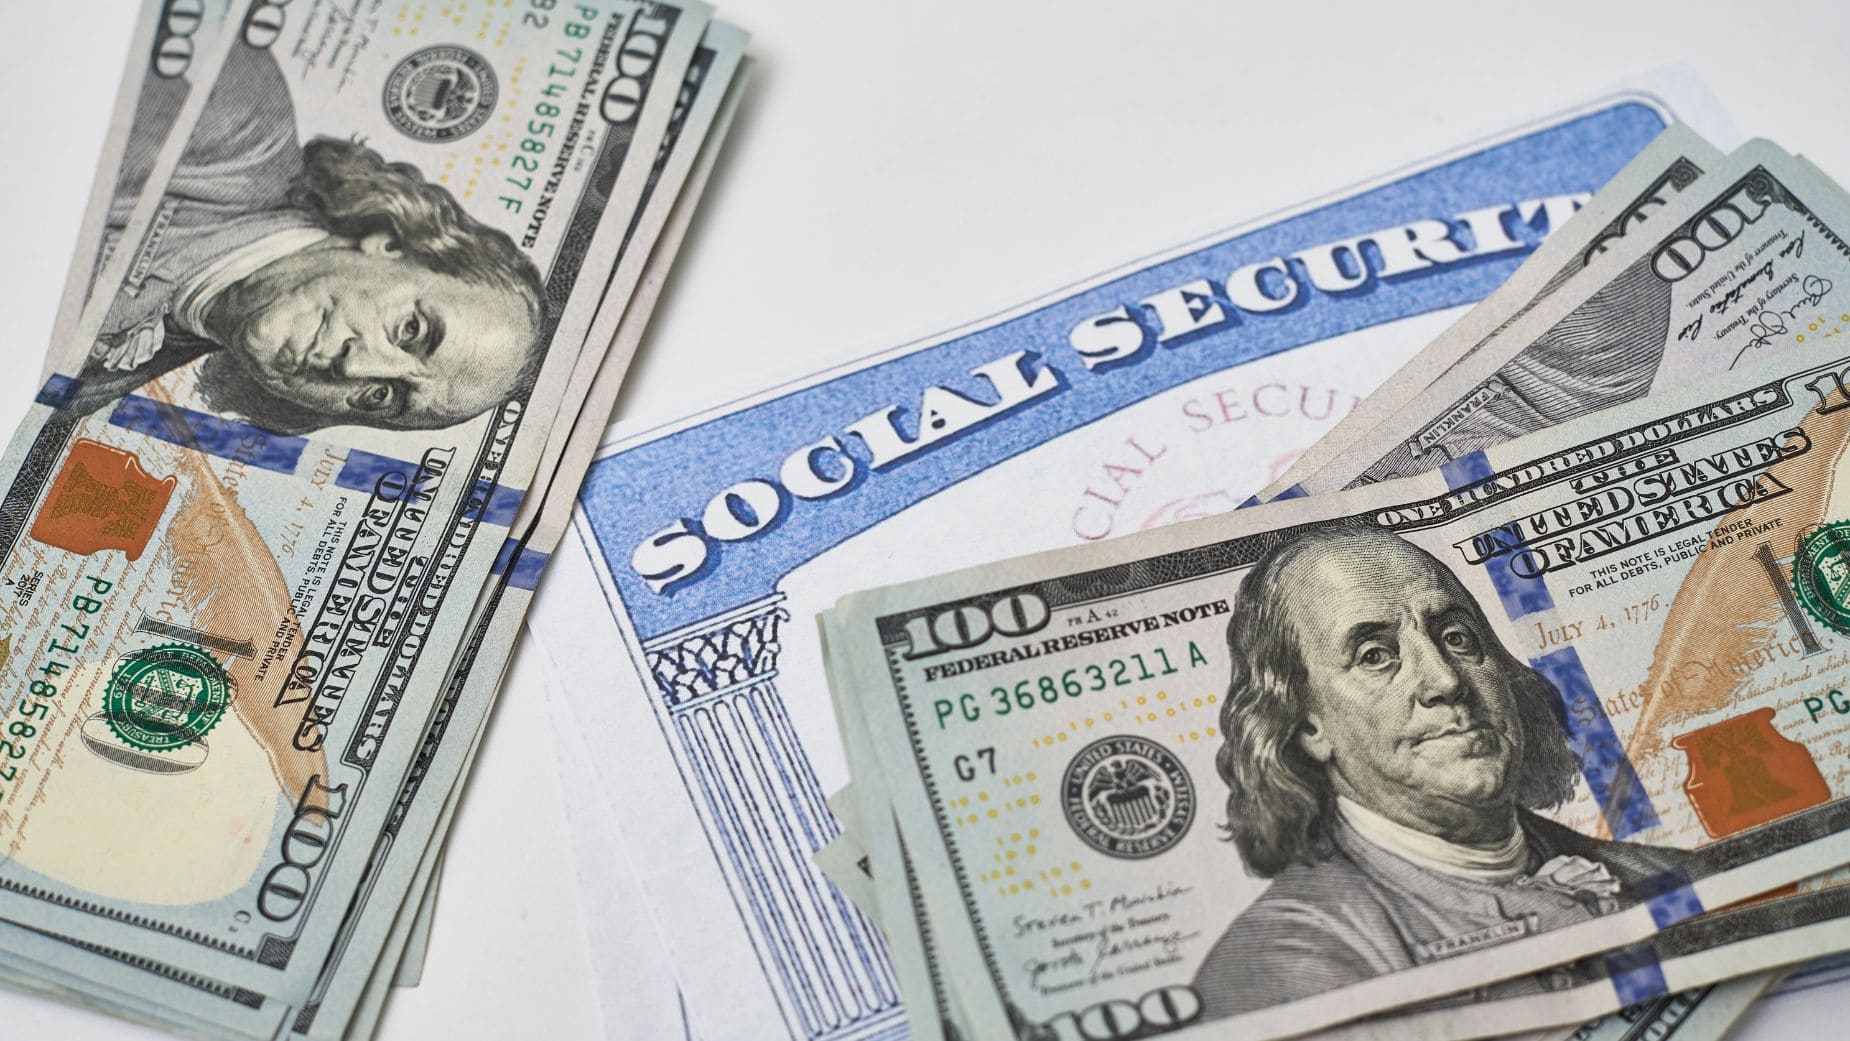 Social Security will send more checks but only to some citizens